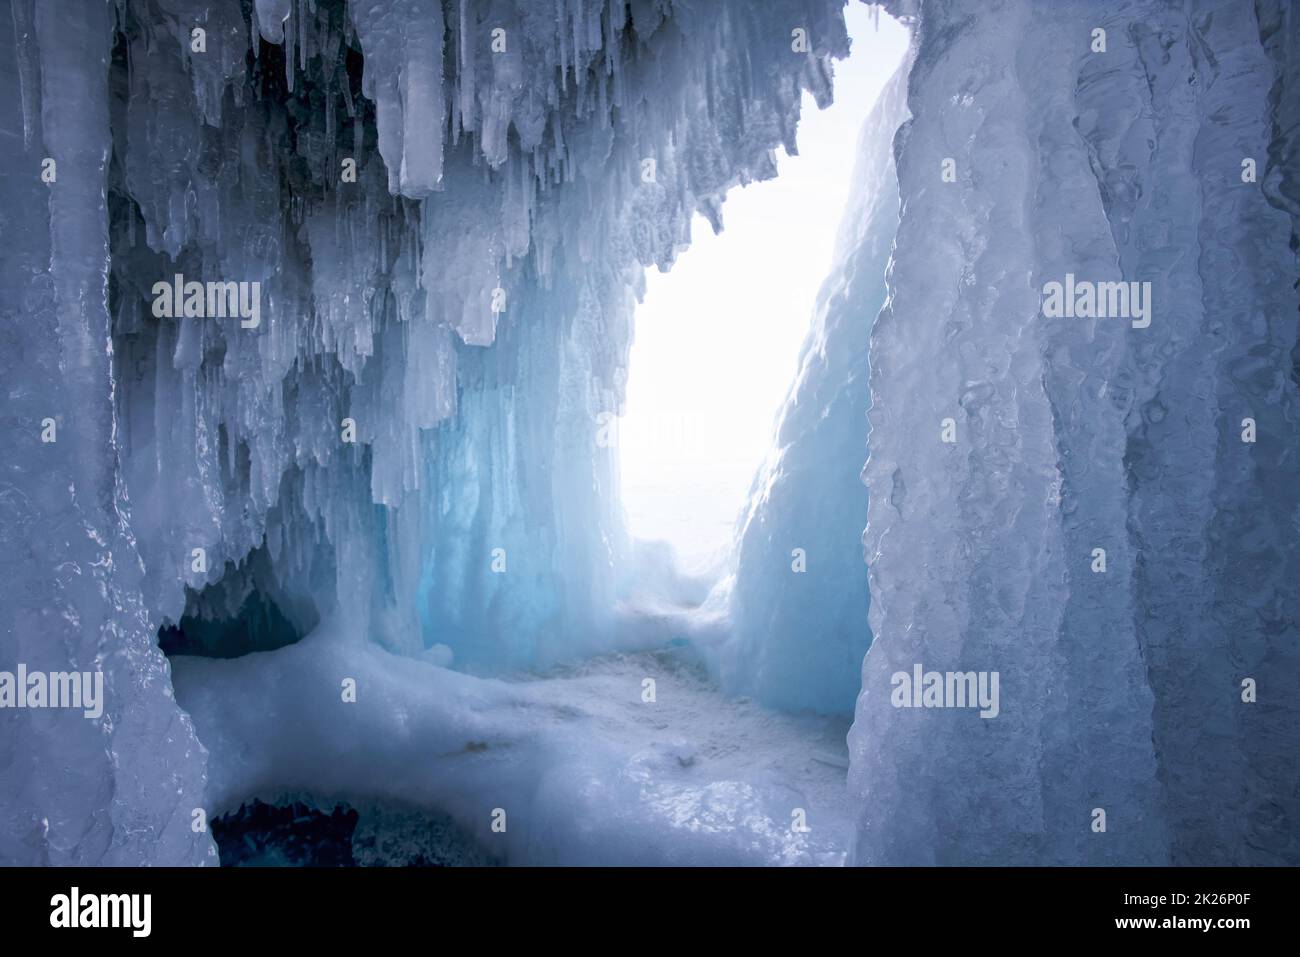 An ice cave beckons on Lake Baikal, the world's oldest and deepest freshwater lake, located in Siberia. Stock Photo